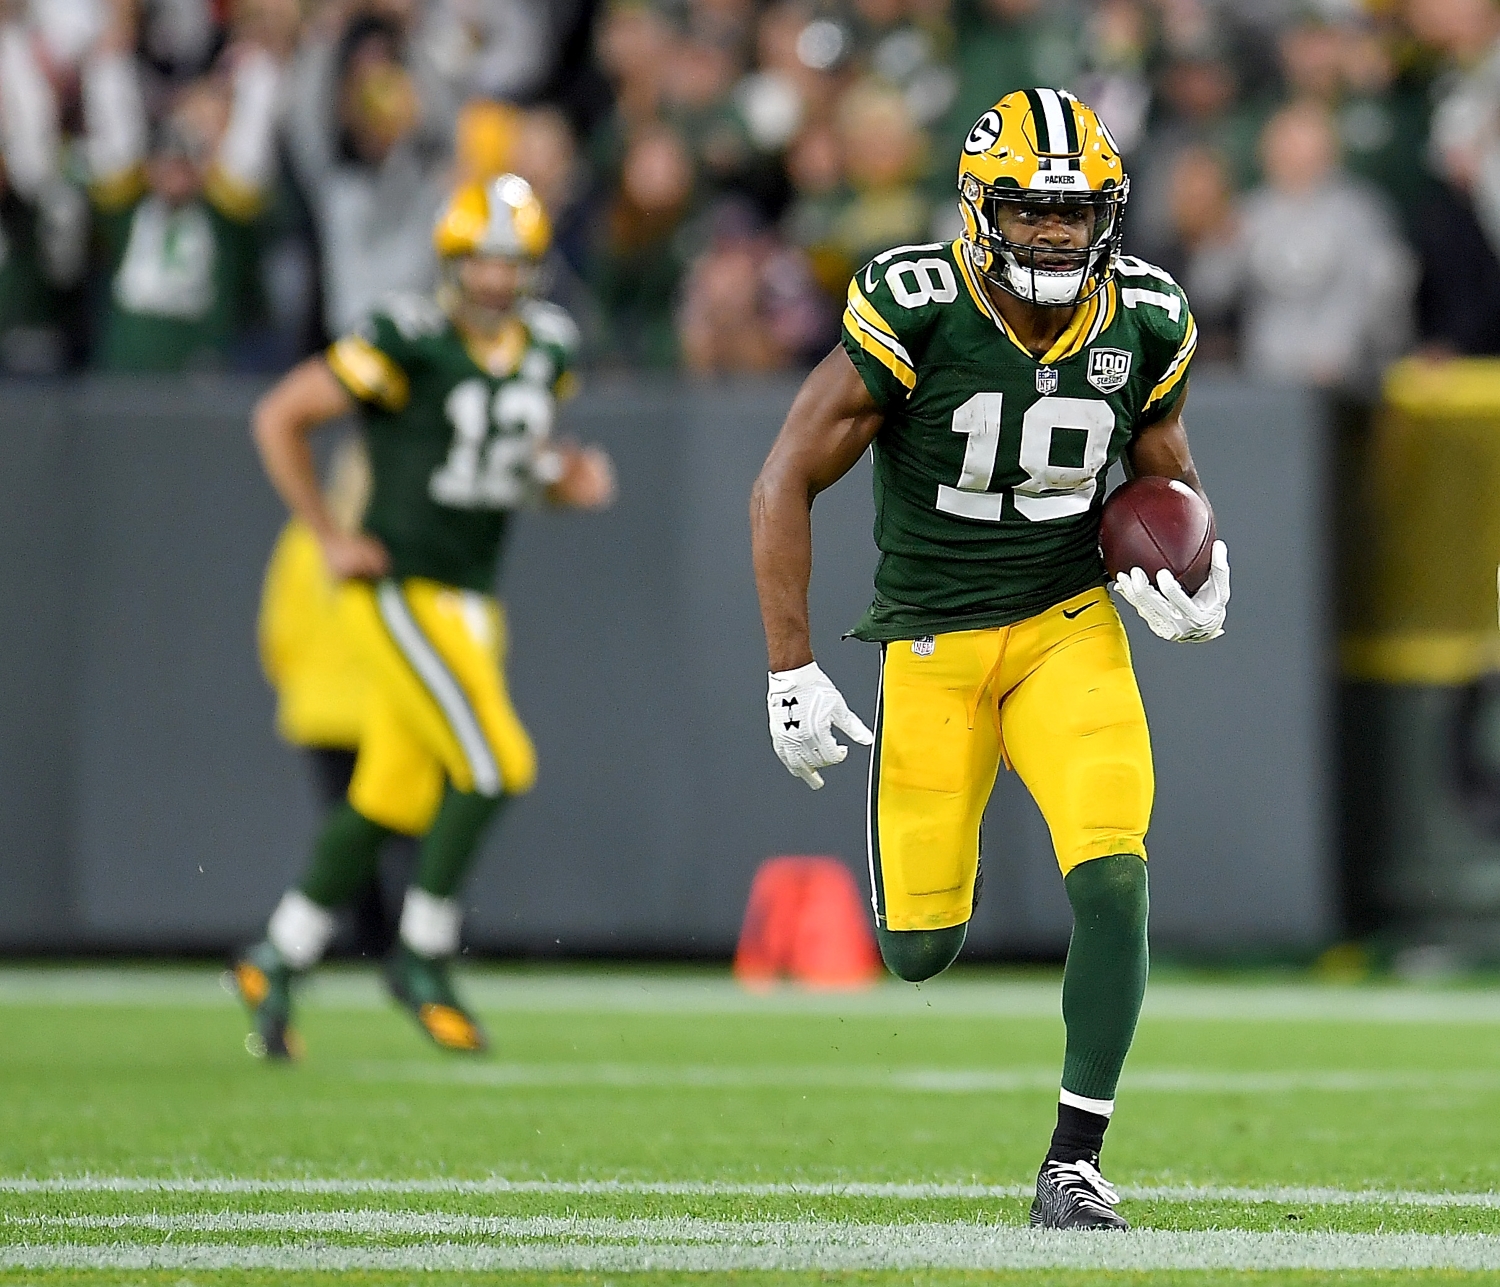 Aaron Rodgers watches Green Bay Packers receiver Randall Cobb run down the field with the ball in his hands.